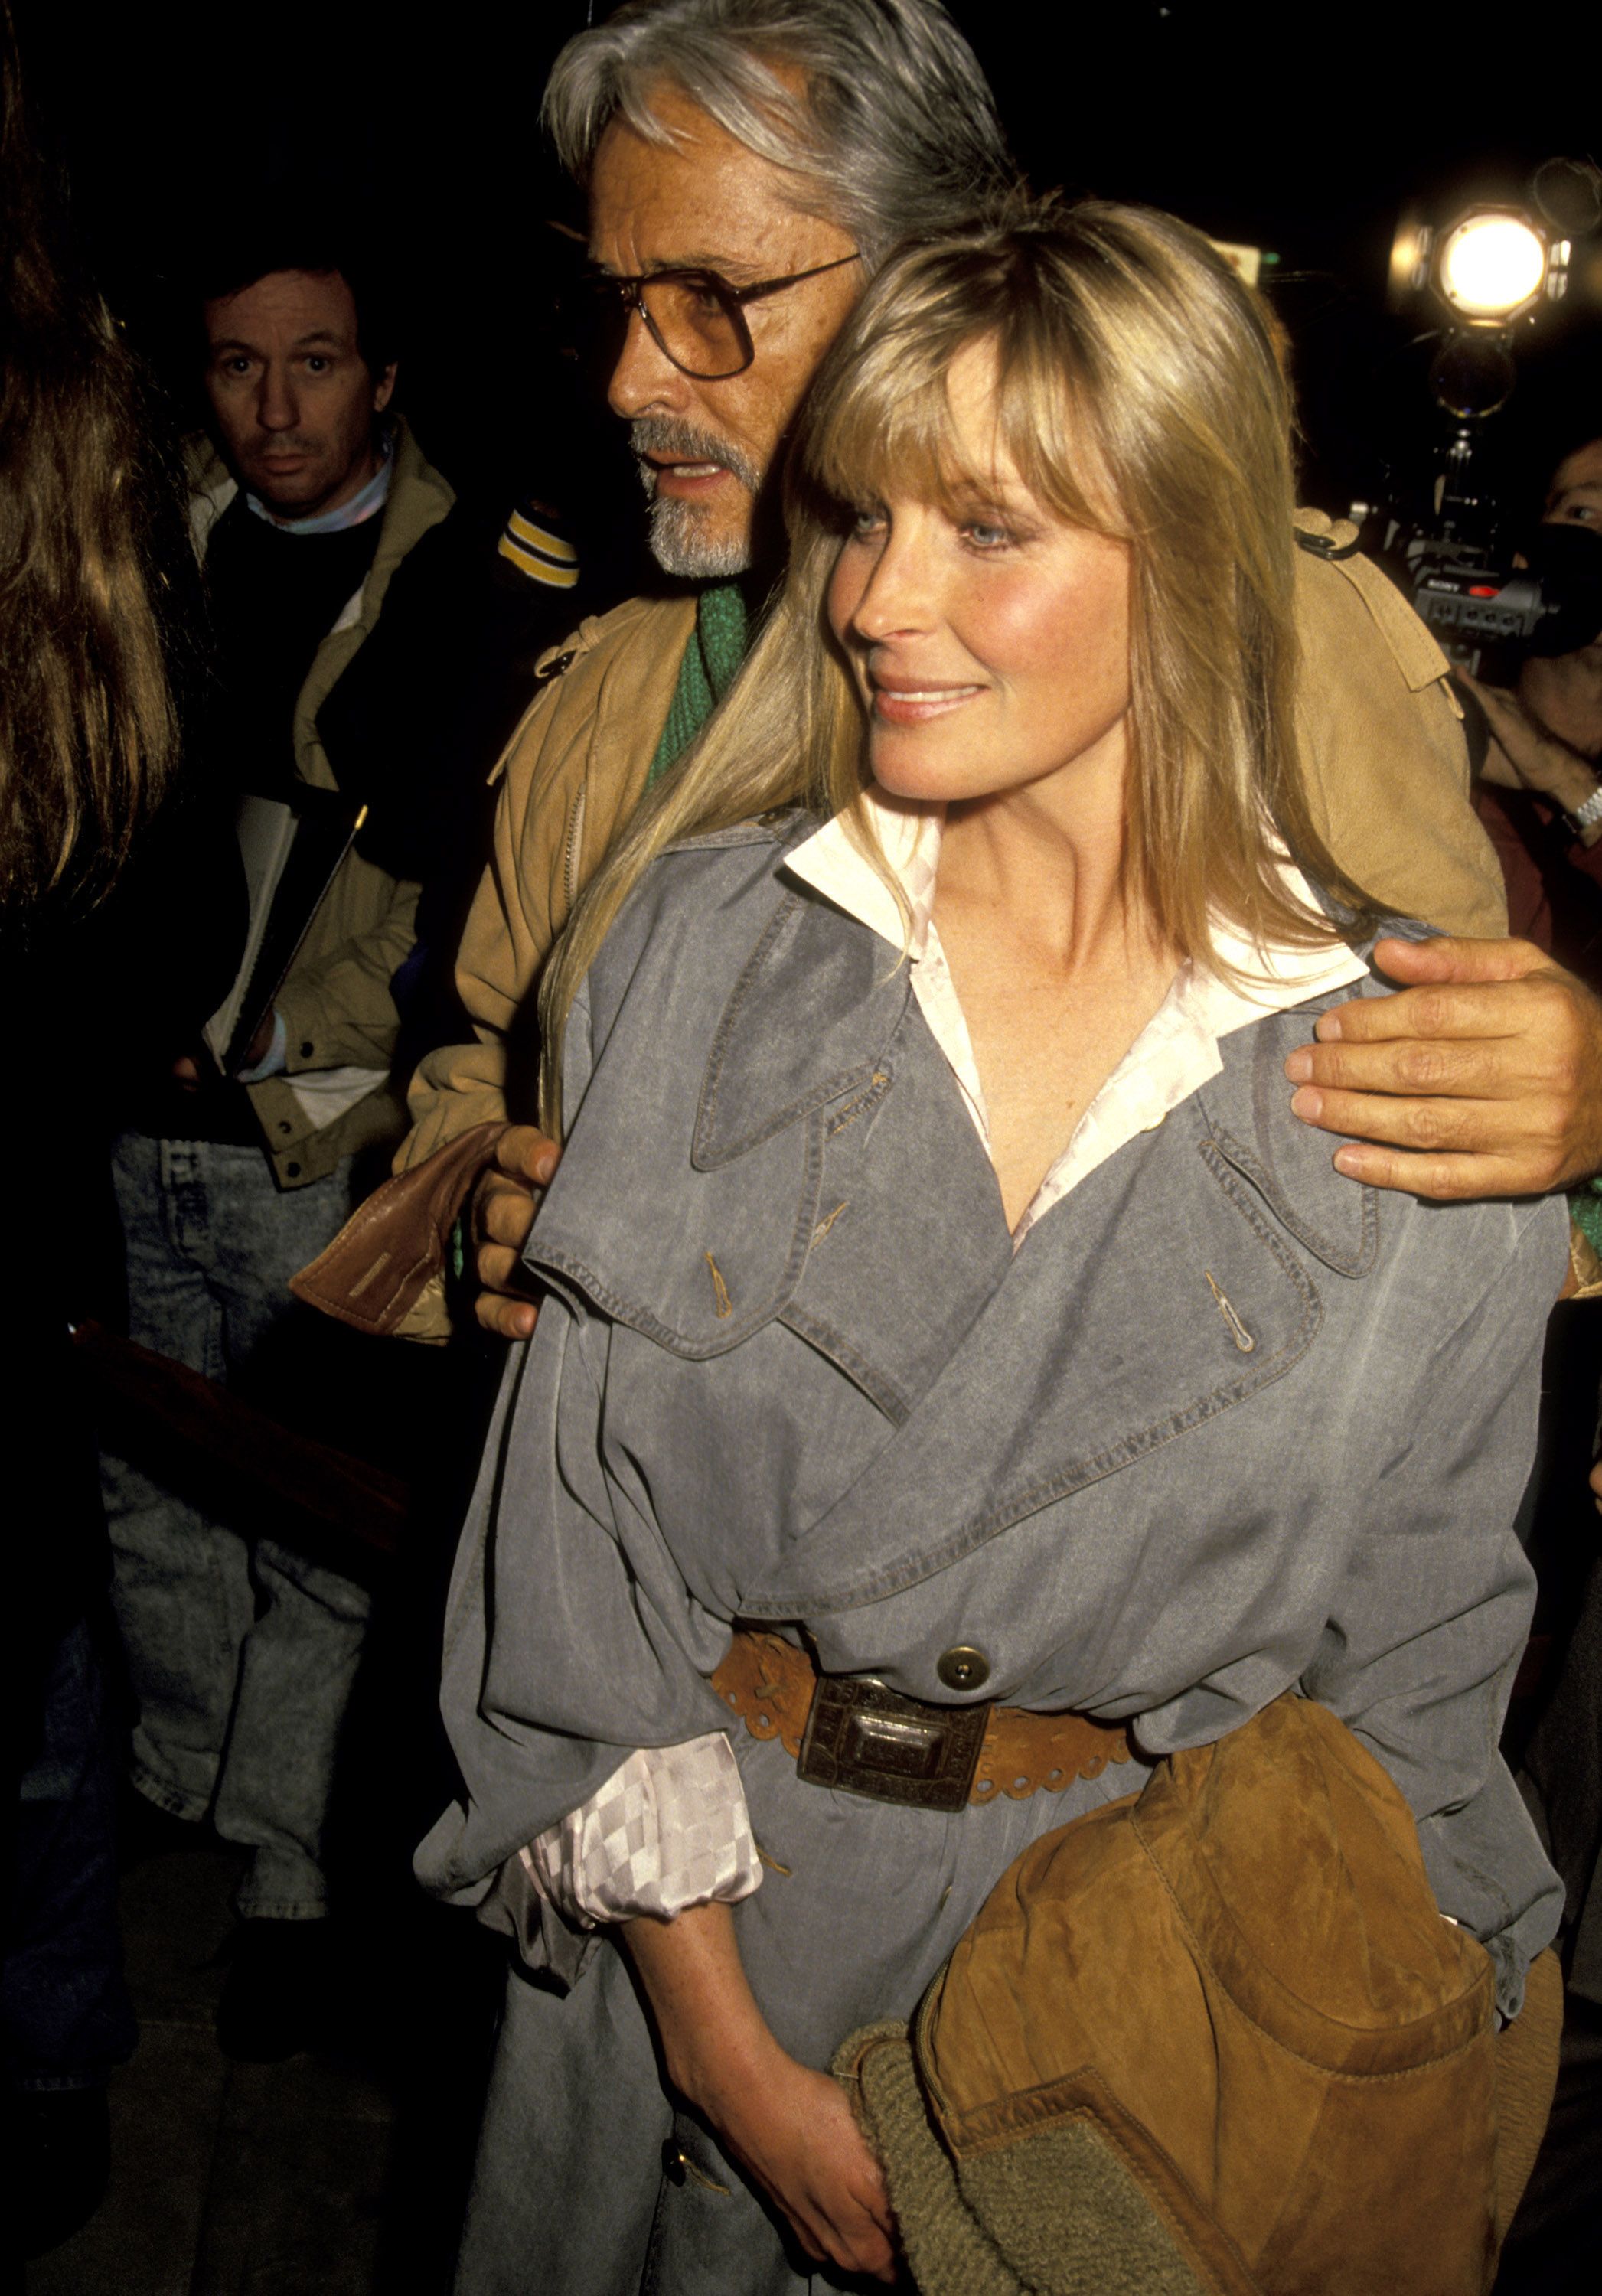 Bo Derek and John Derek during "The Field" Premiere - December 12, 1990 at Academy Theater in Beverly Hills, California, United States. | Source: Getty Images